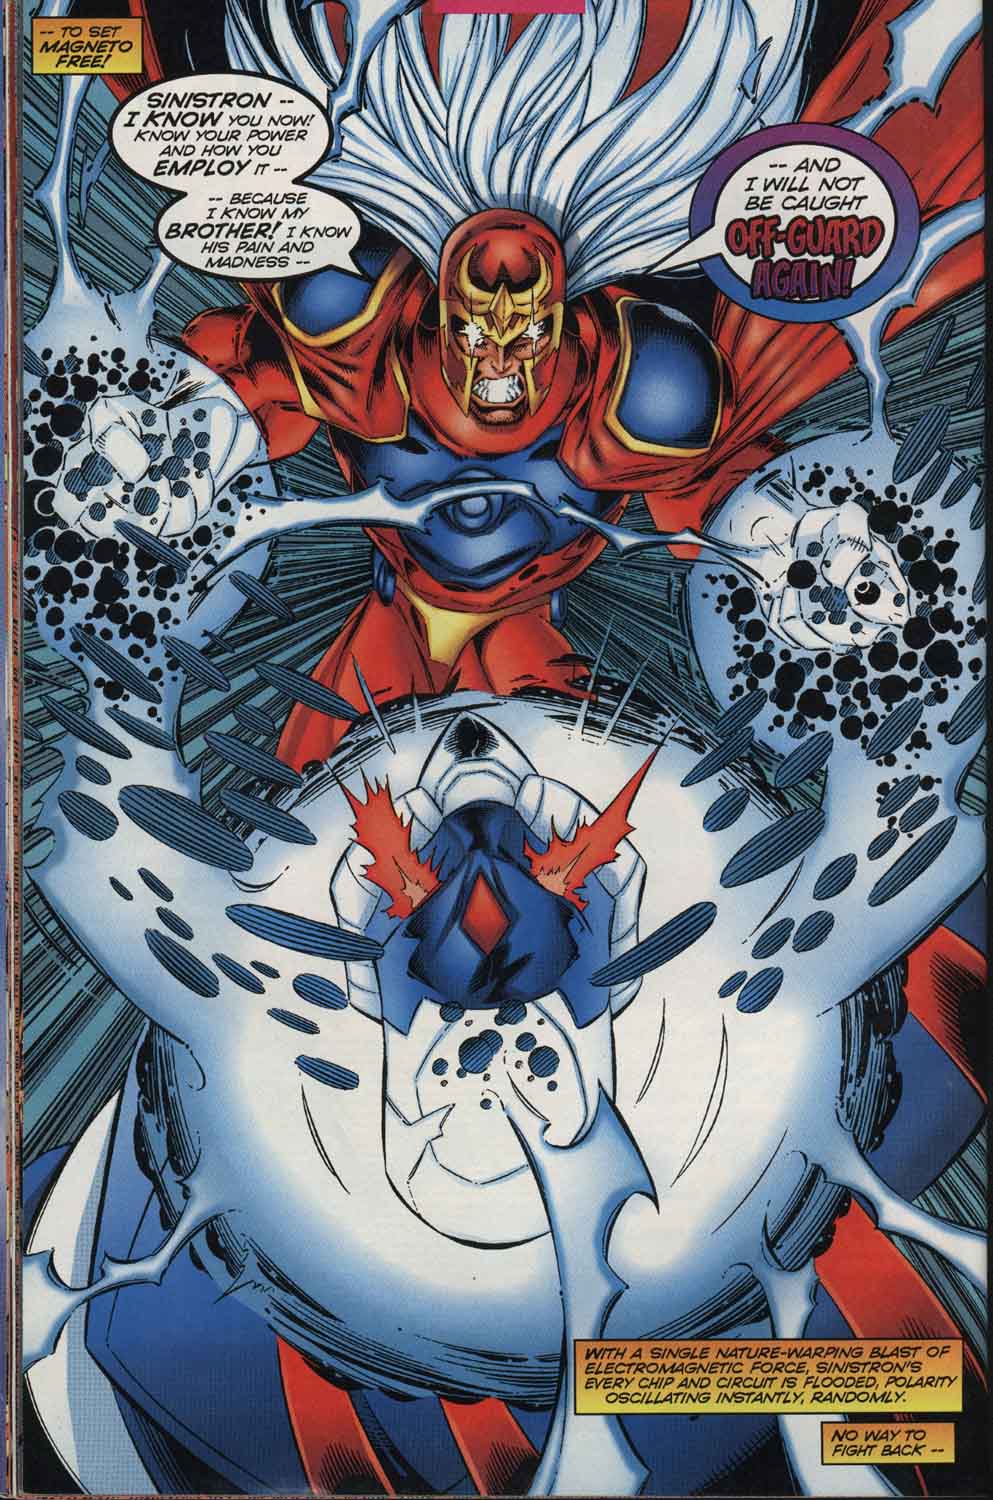 Magneto lays waste to Sinistron in Magneto and the Magnetic Men Vol. 1 #1 "Opposites Attract" (1996), Marvel Comics, DC. Words by Gerard Jones, art by Jeff Matsuda, Art Thibert, and Kevin Tinsley.